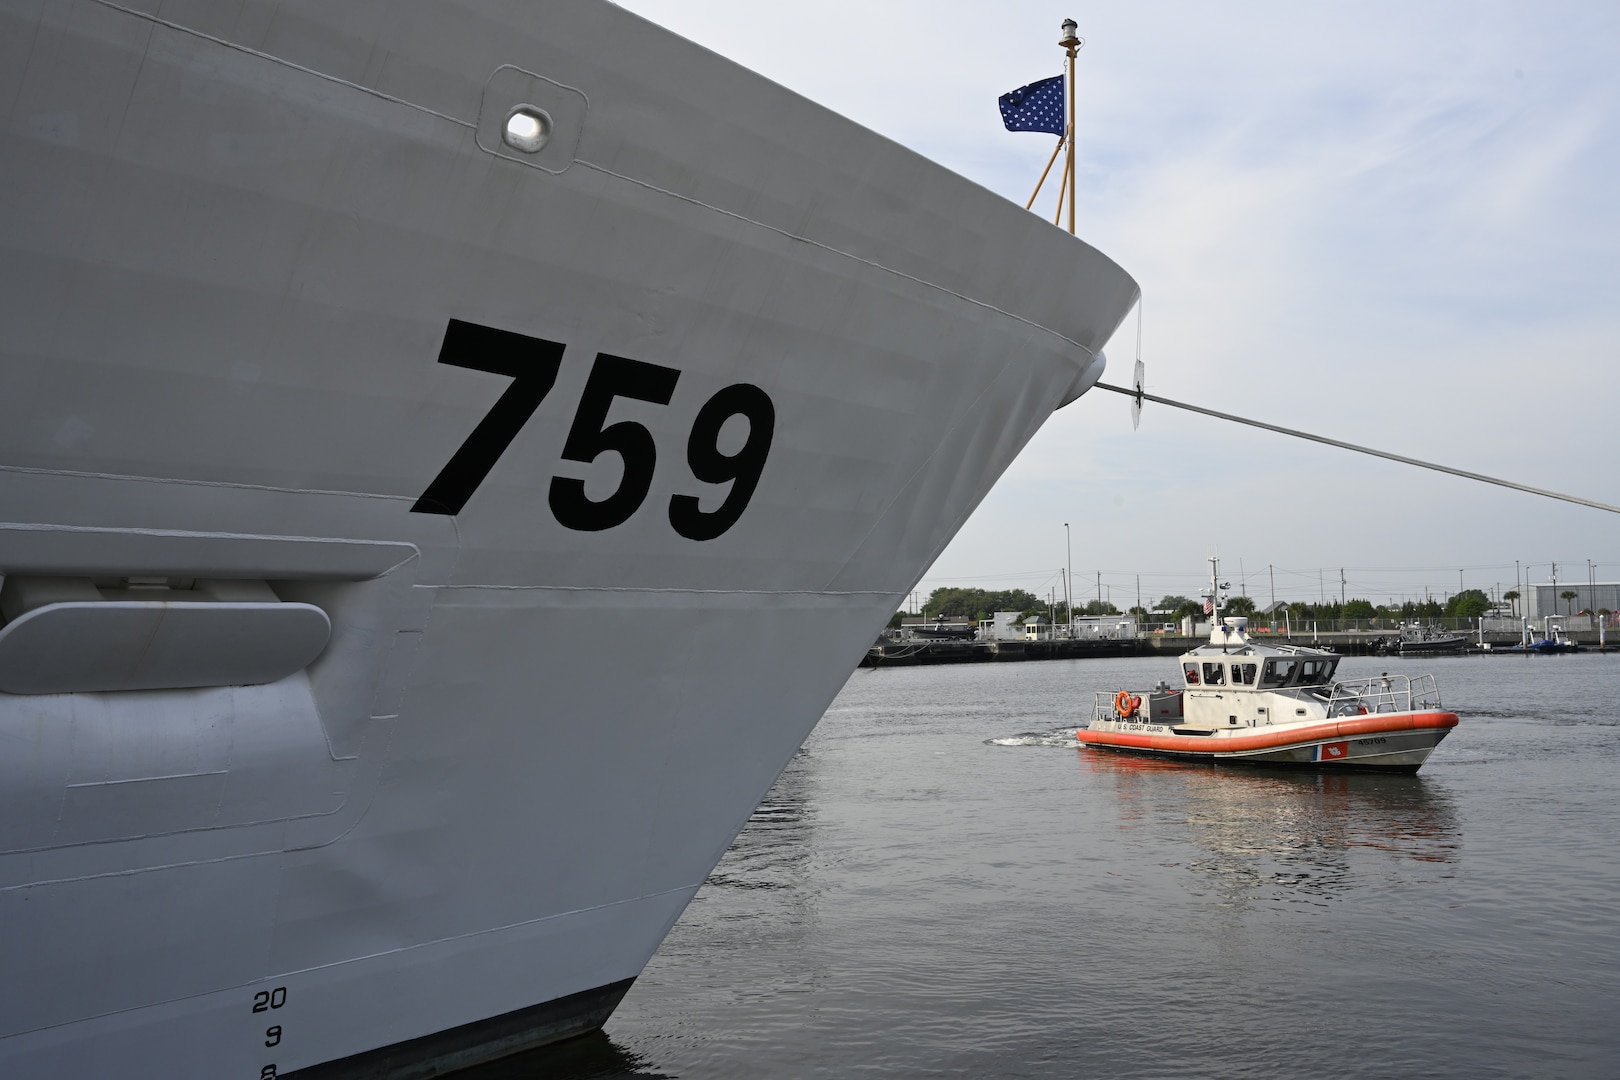 A boat crew from Coast Guard Station Charleston patrols near the Coast Guard Cutter Calhoun (WMSL 759) in North Charleston, South Carolina, April 20, 2024. The Calhoun, which is named for the first Master Chief Petty Officer of the Coast Guard, Charles Calhoun, was commissioned into service as the 10th National Security Cutter. (U.S. Coast Guard photo by Senior Chief Petty Officer Nick Ameen)